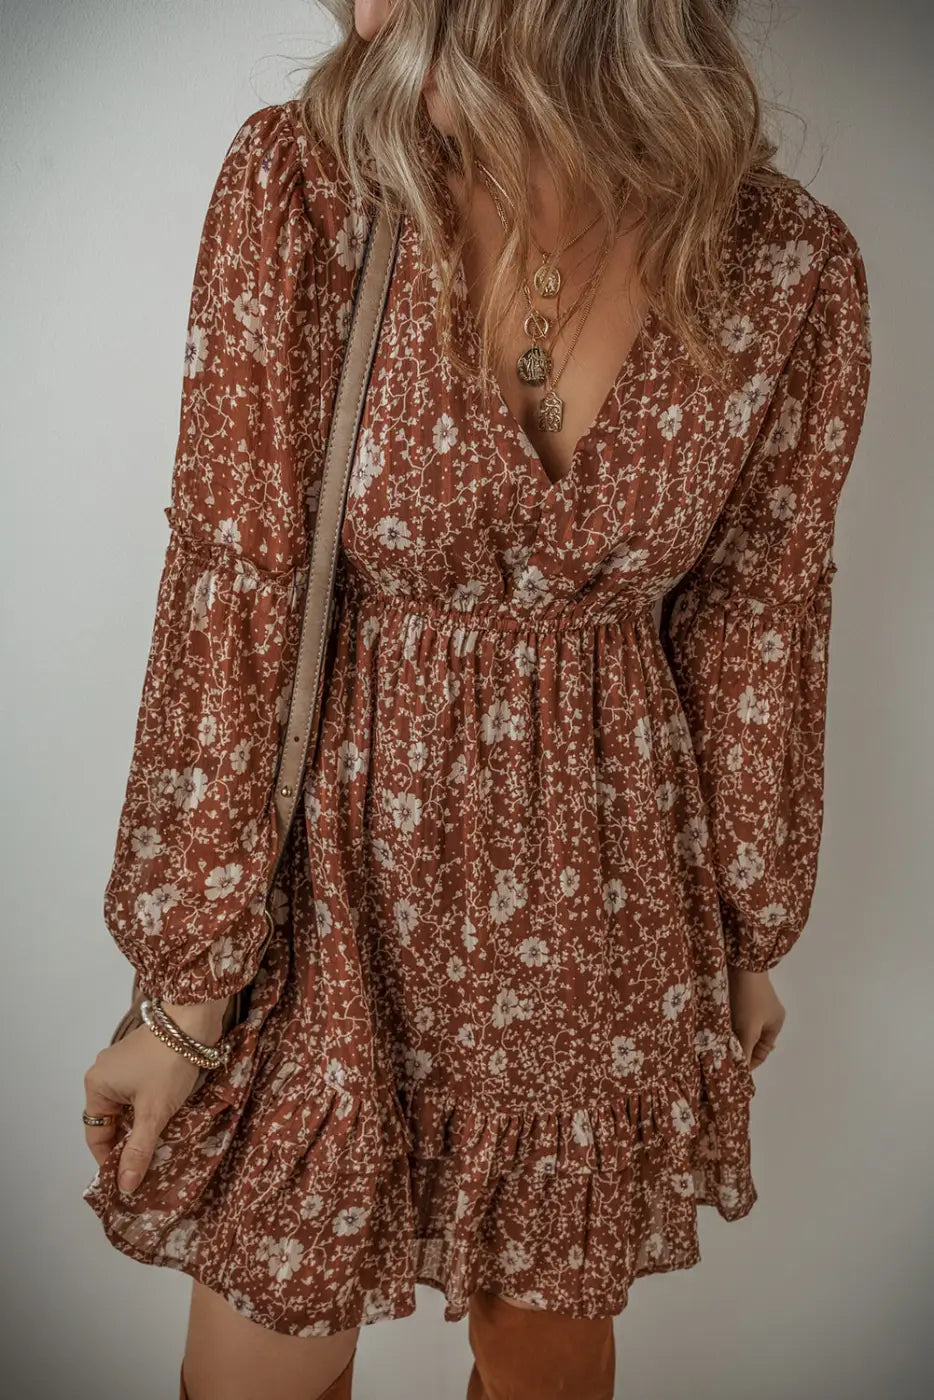 Ruffle romance boho: floral print mini dress with long sleeves, v-neckline, in rust and cream colors